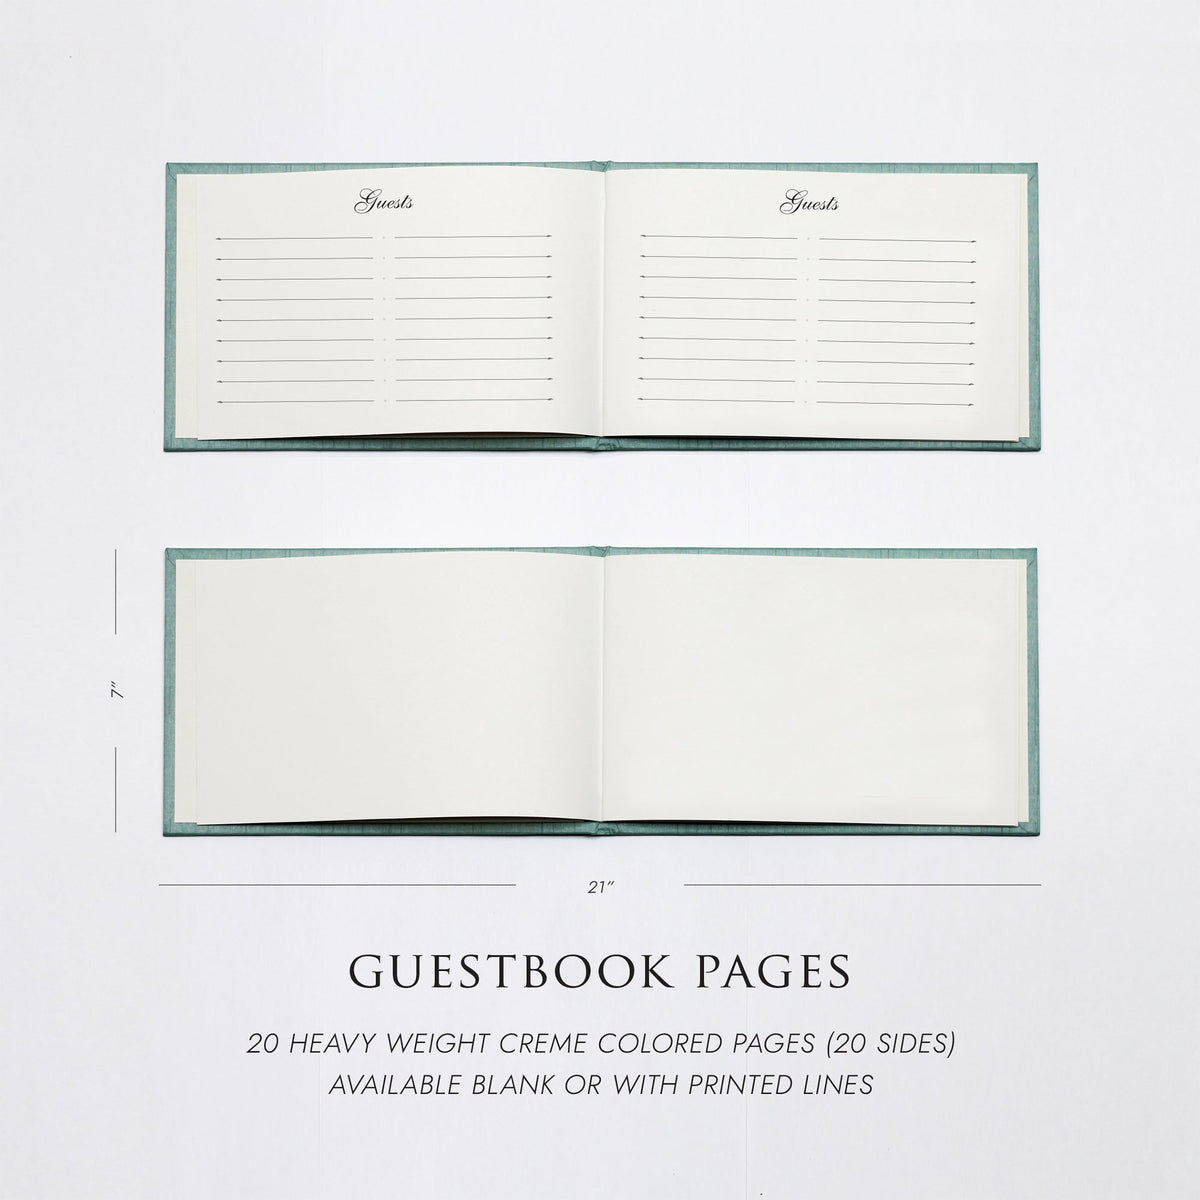 Guestbook Embossed with “Guests” | Cover: Celery Cotton | Available Personalized